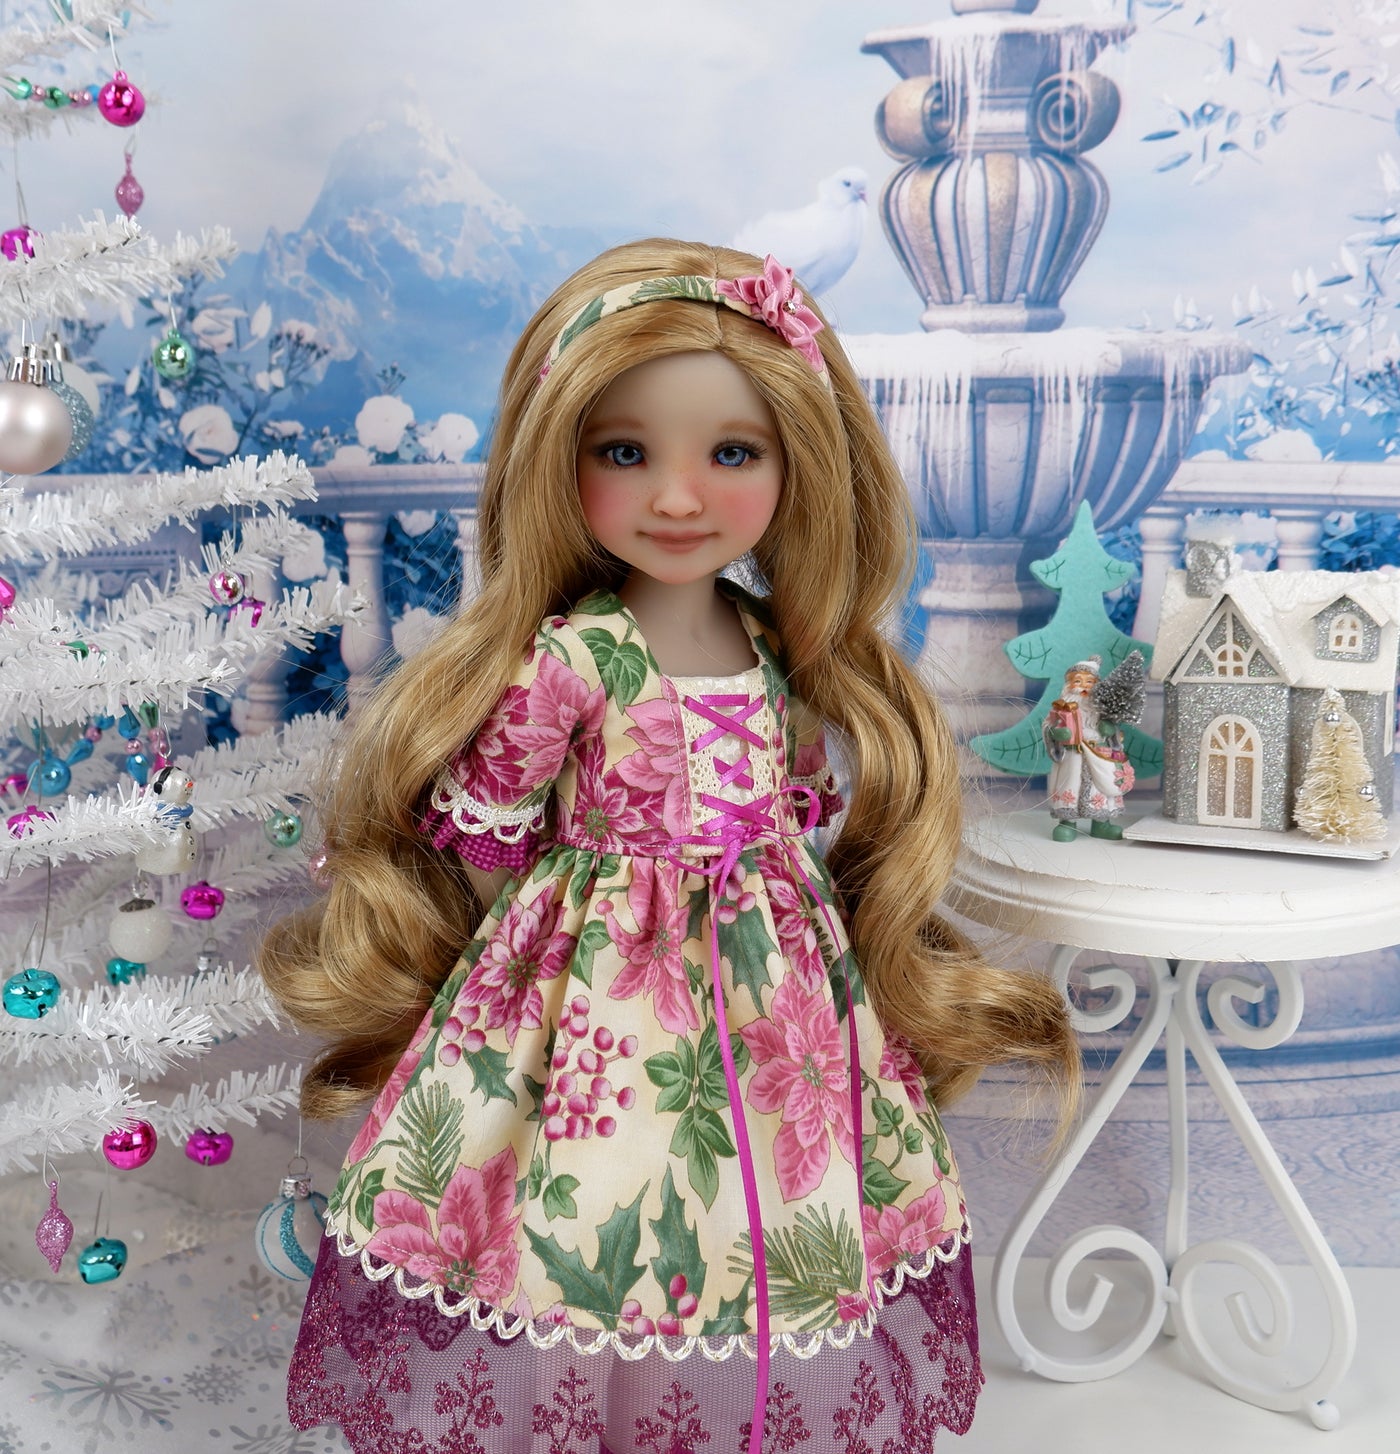 Poinsettia Elegance - dirndl dress ensemble with shoes for Ruby Red Fashion Friends doll